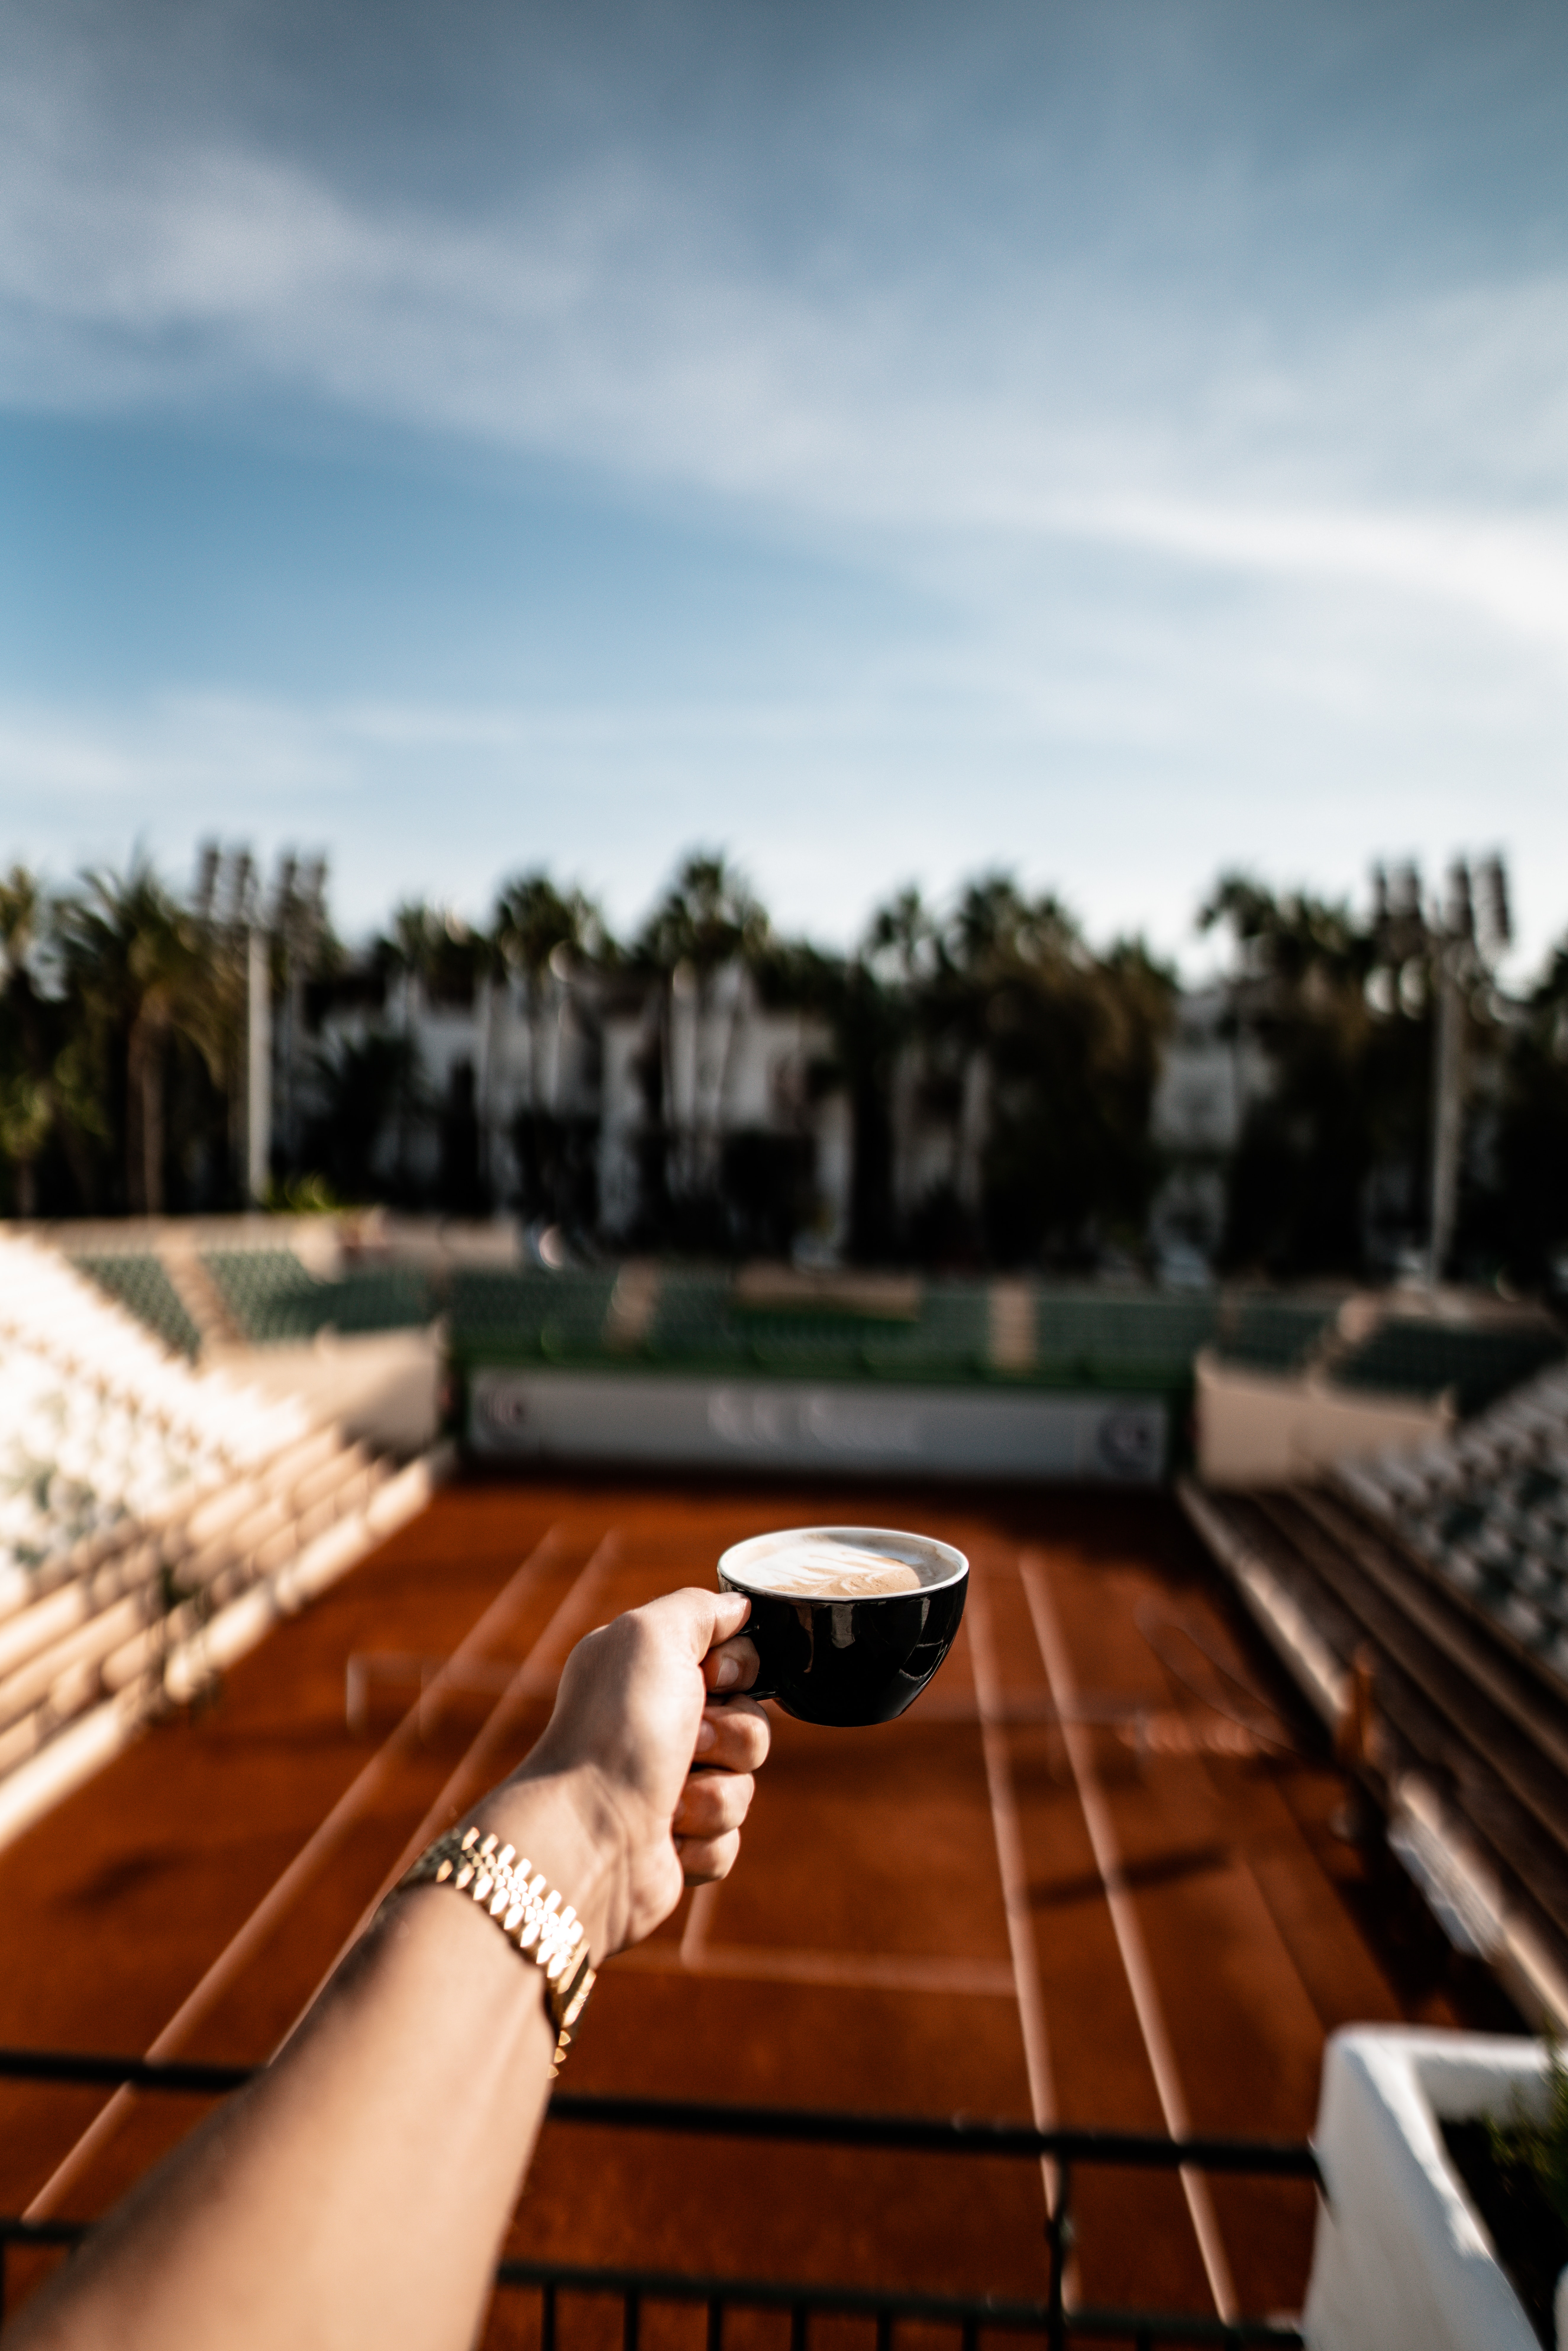 1920x1080 Background miscellanea, coffee, hand, miscellaneous, cup, tennis court